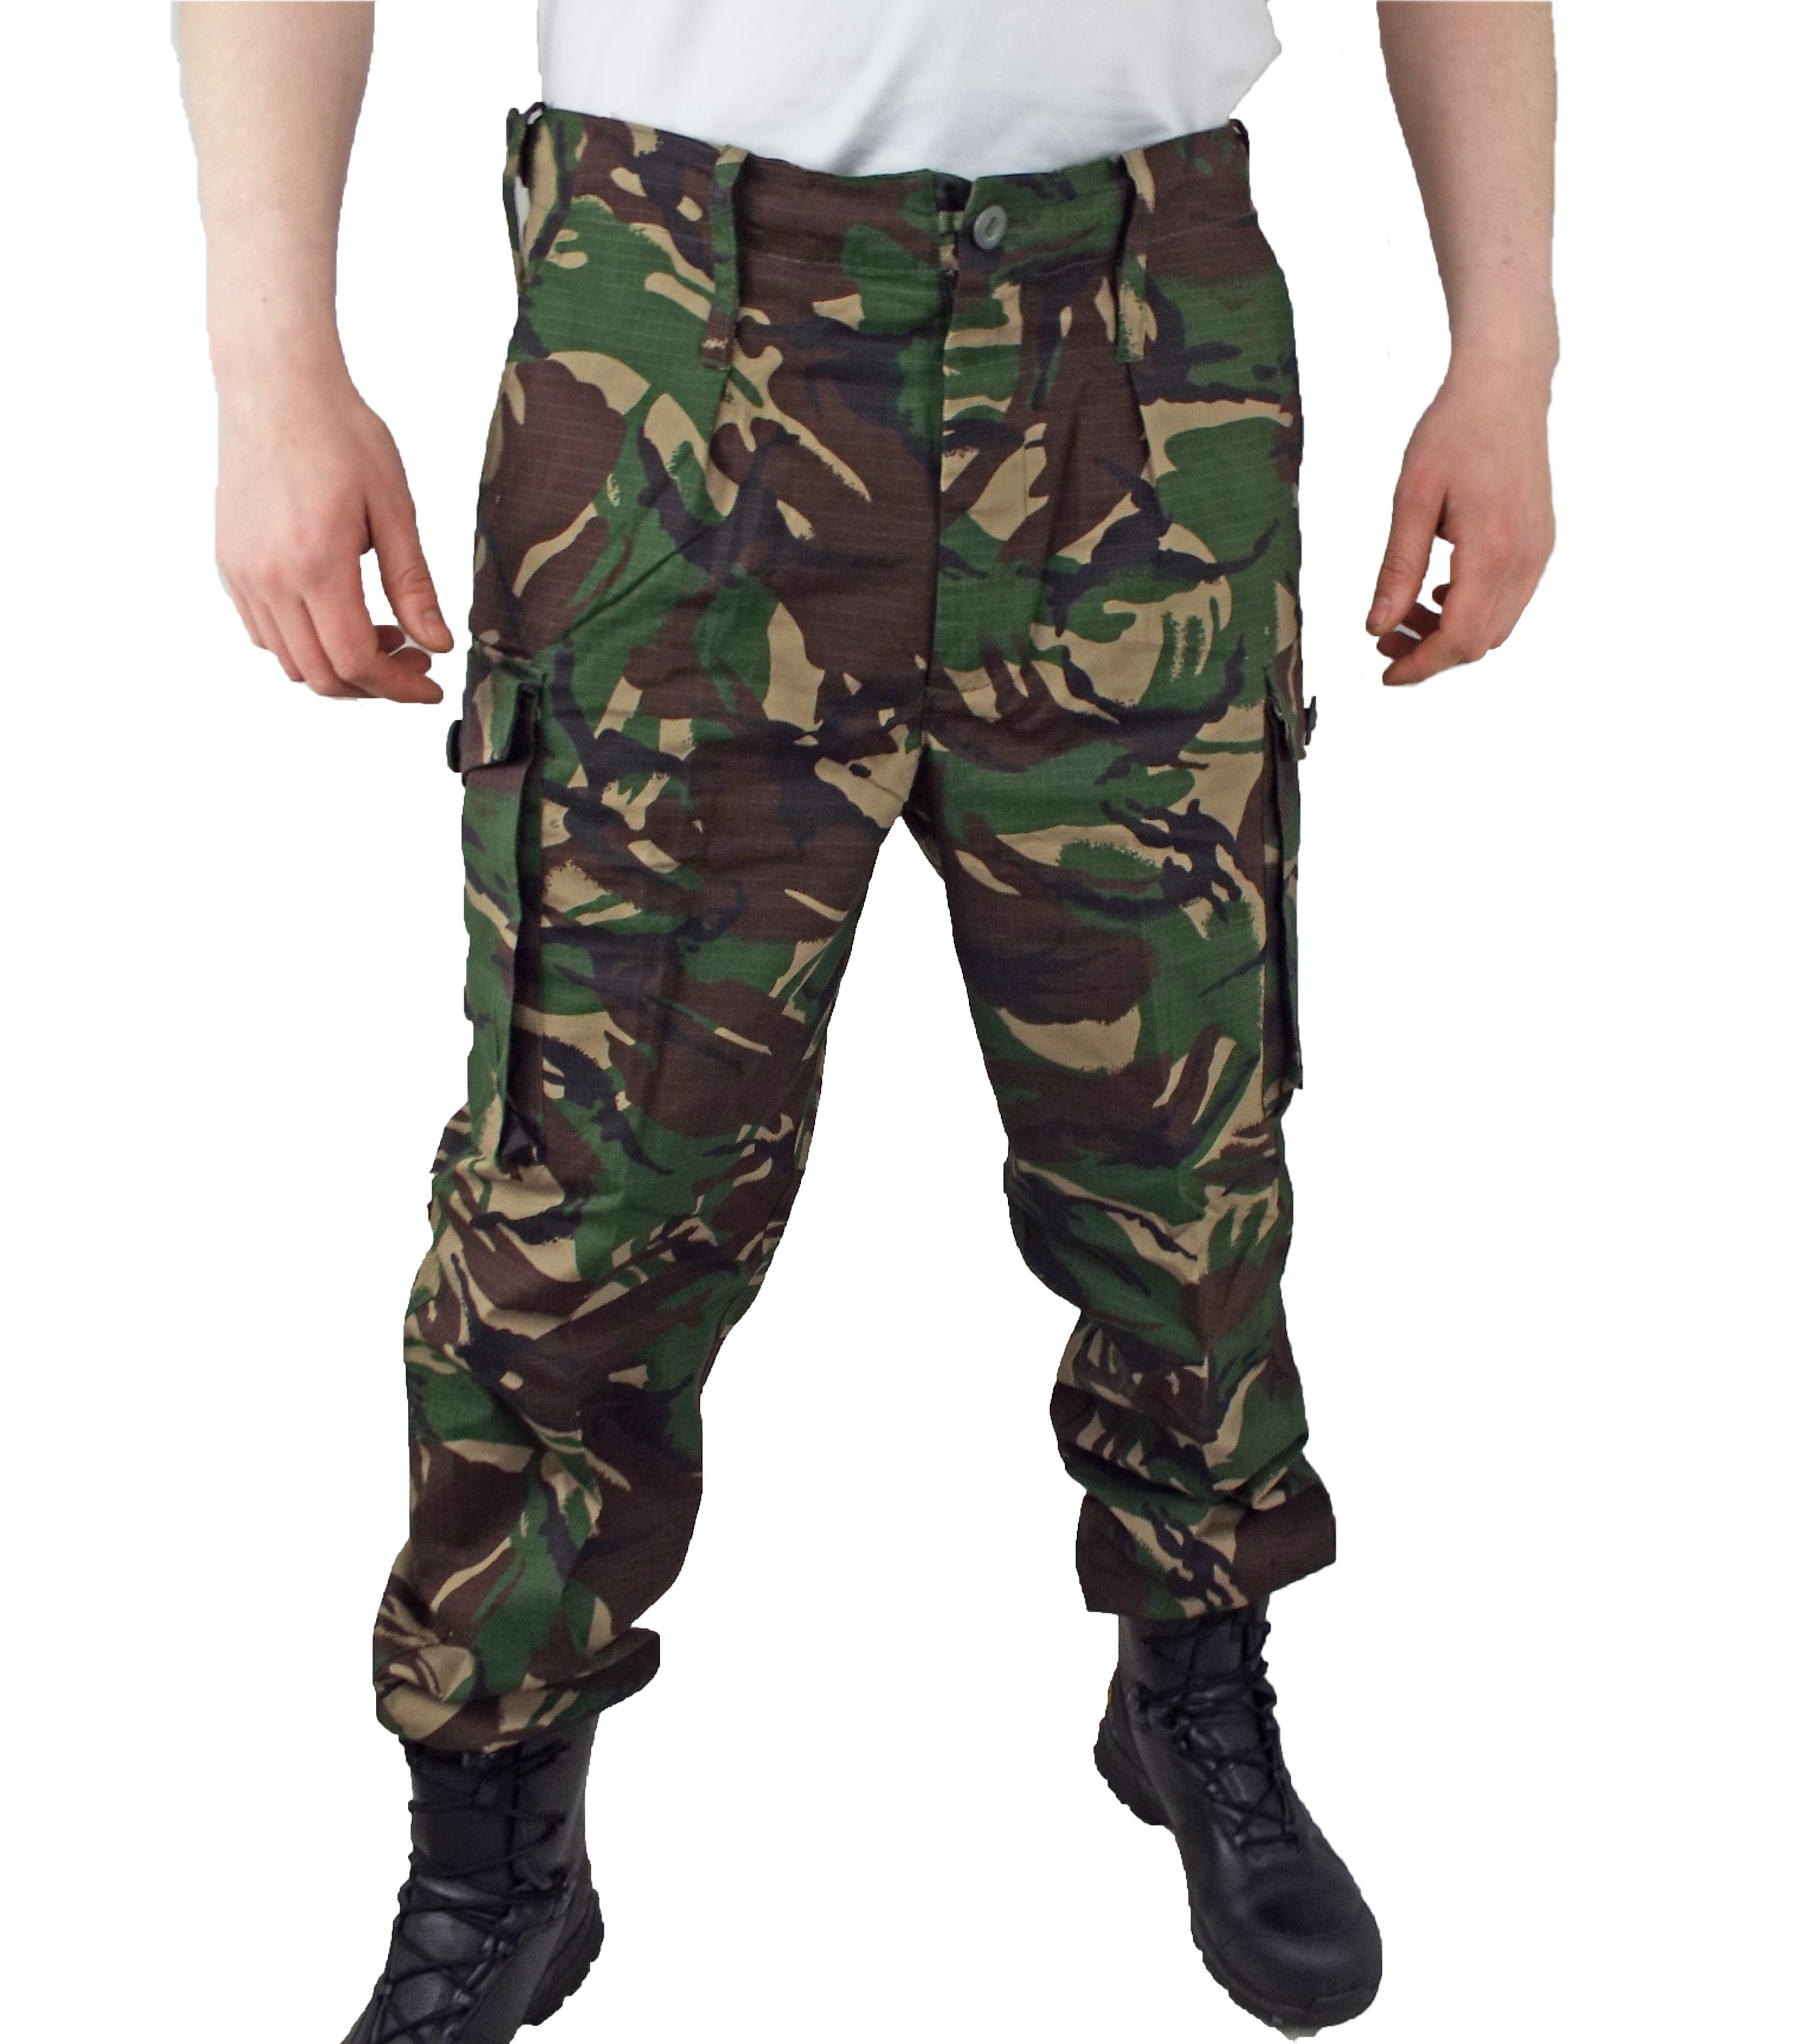 British Army Surplus DPM Camo Trousers - New - Forces Uniform and Kit